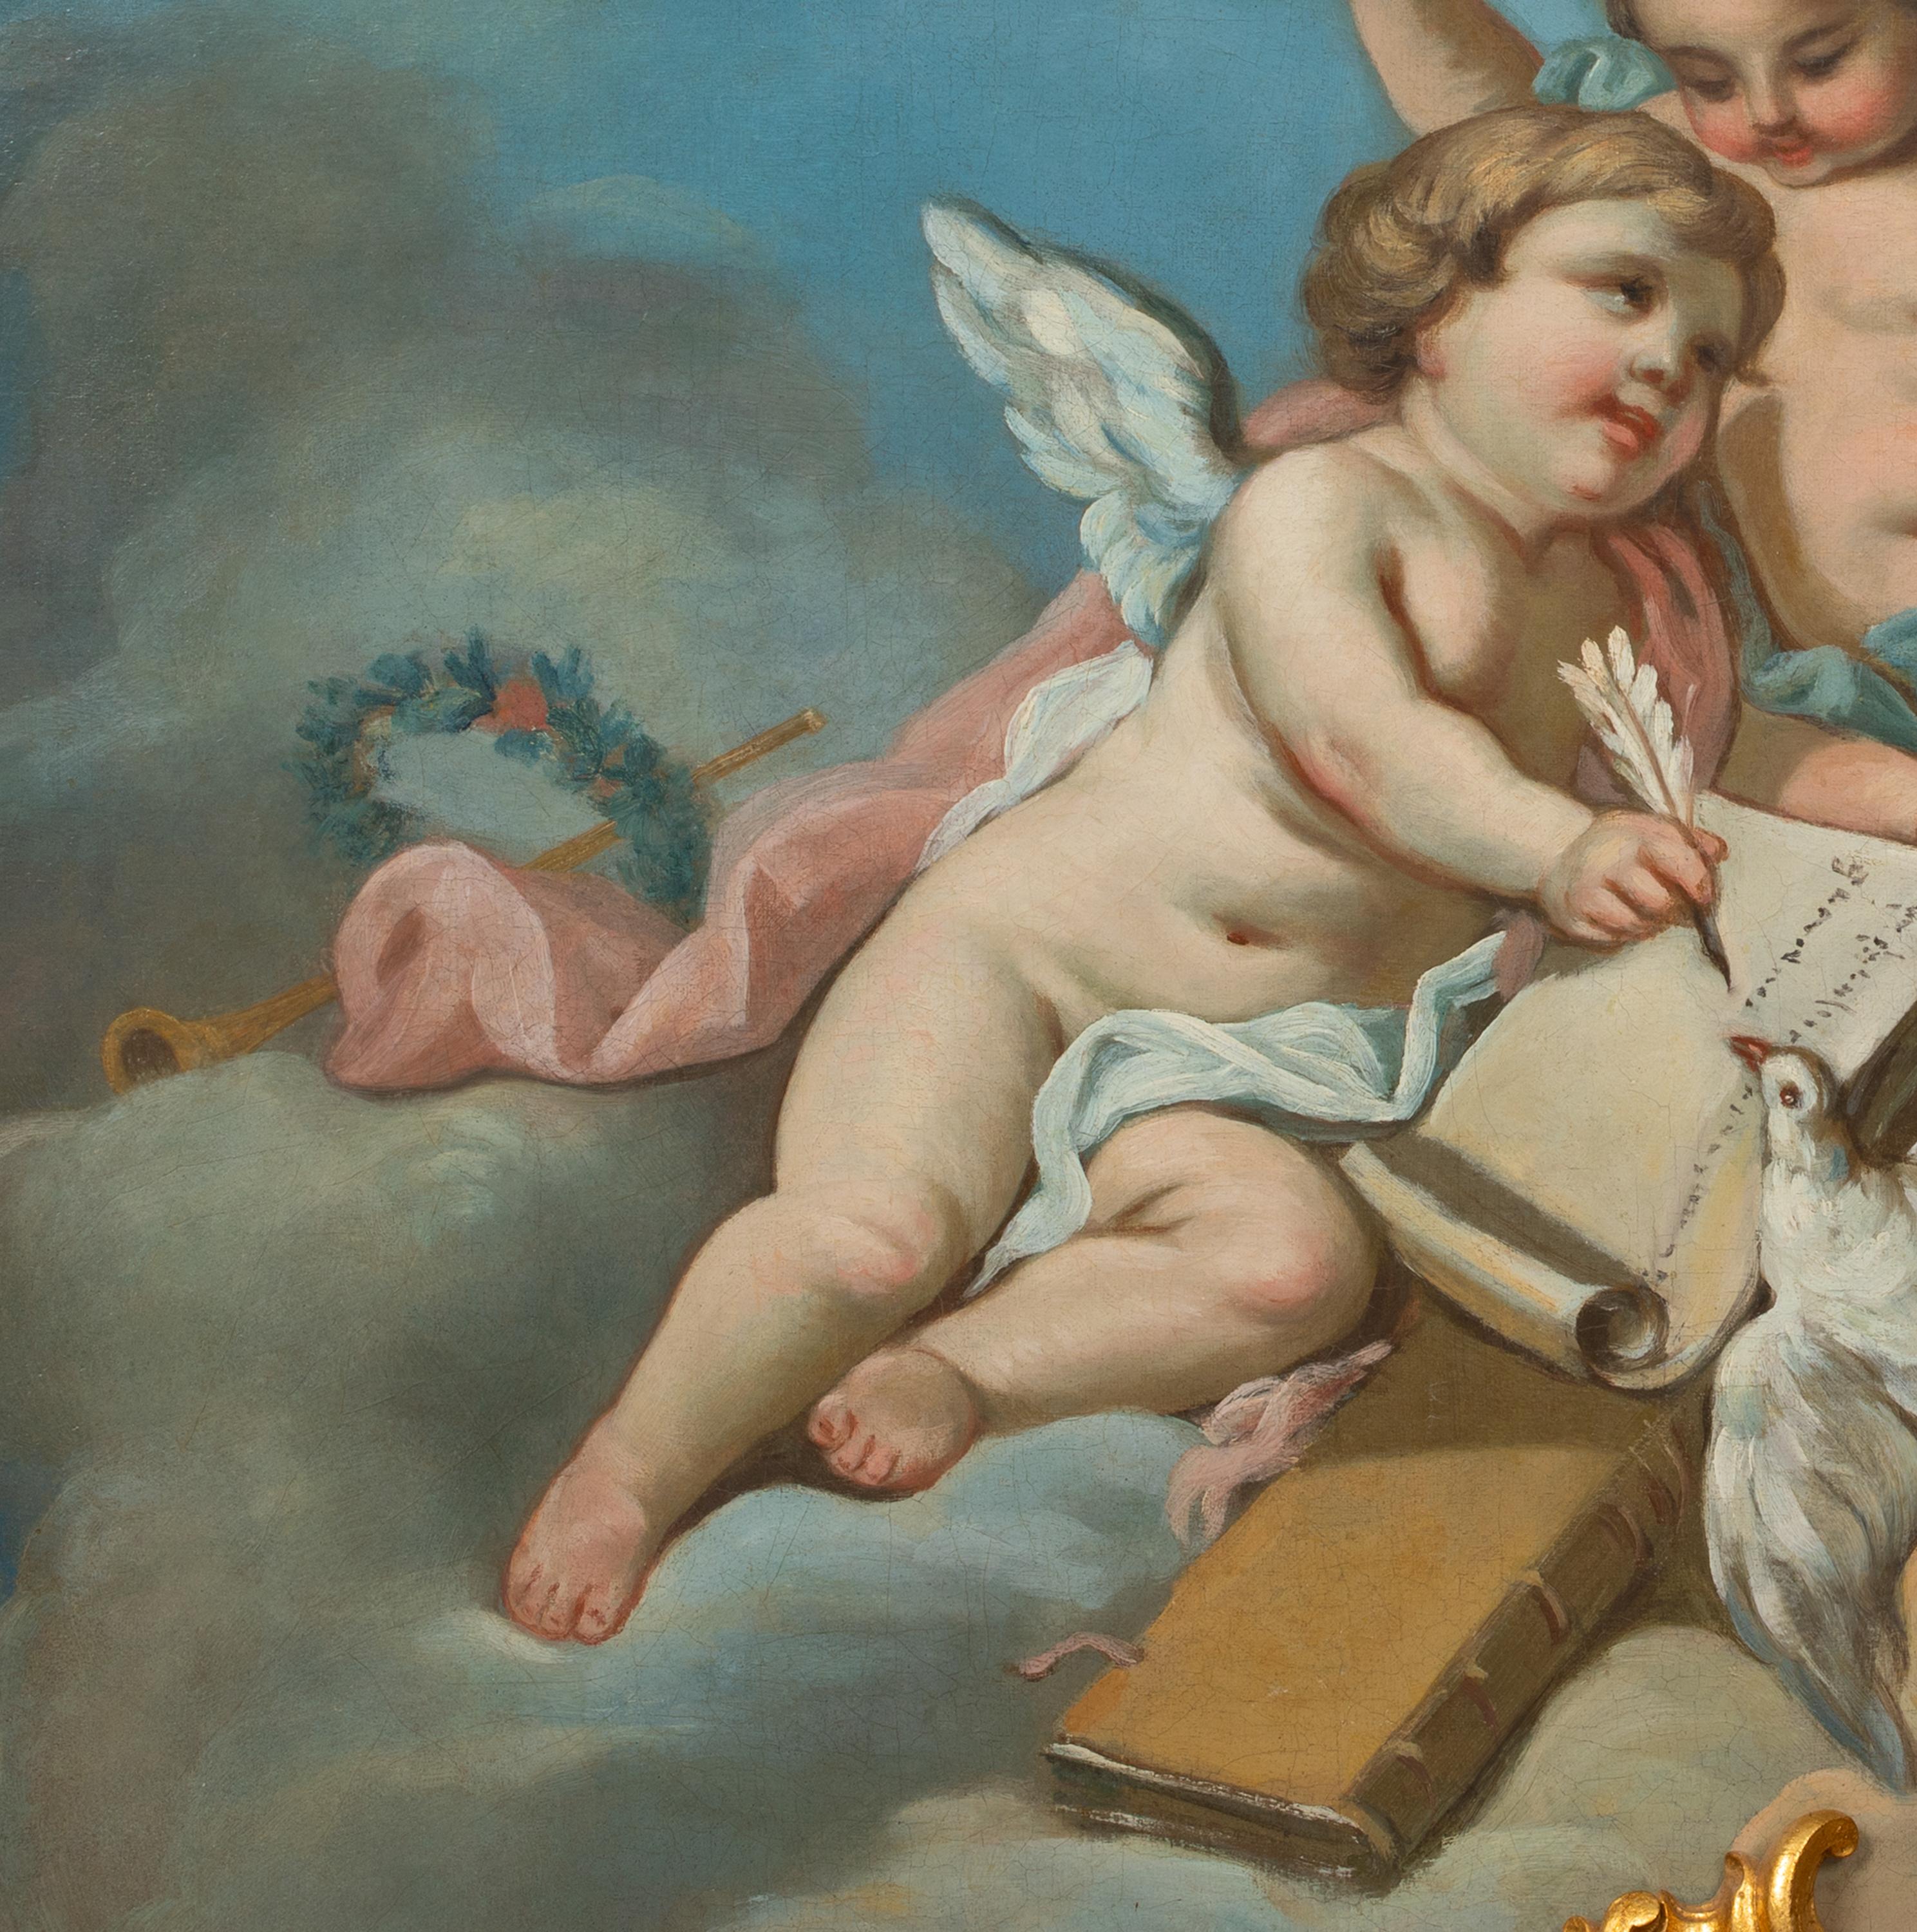 An Allegory of Literature, 18th Century

School of François BOUCHER (1703-1770)

One of a set of Three 

Large 18th Century French allegory of Literature, oil on canvas. Excellent quality and condition allegorical study of cherubs writing upon a